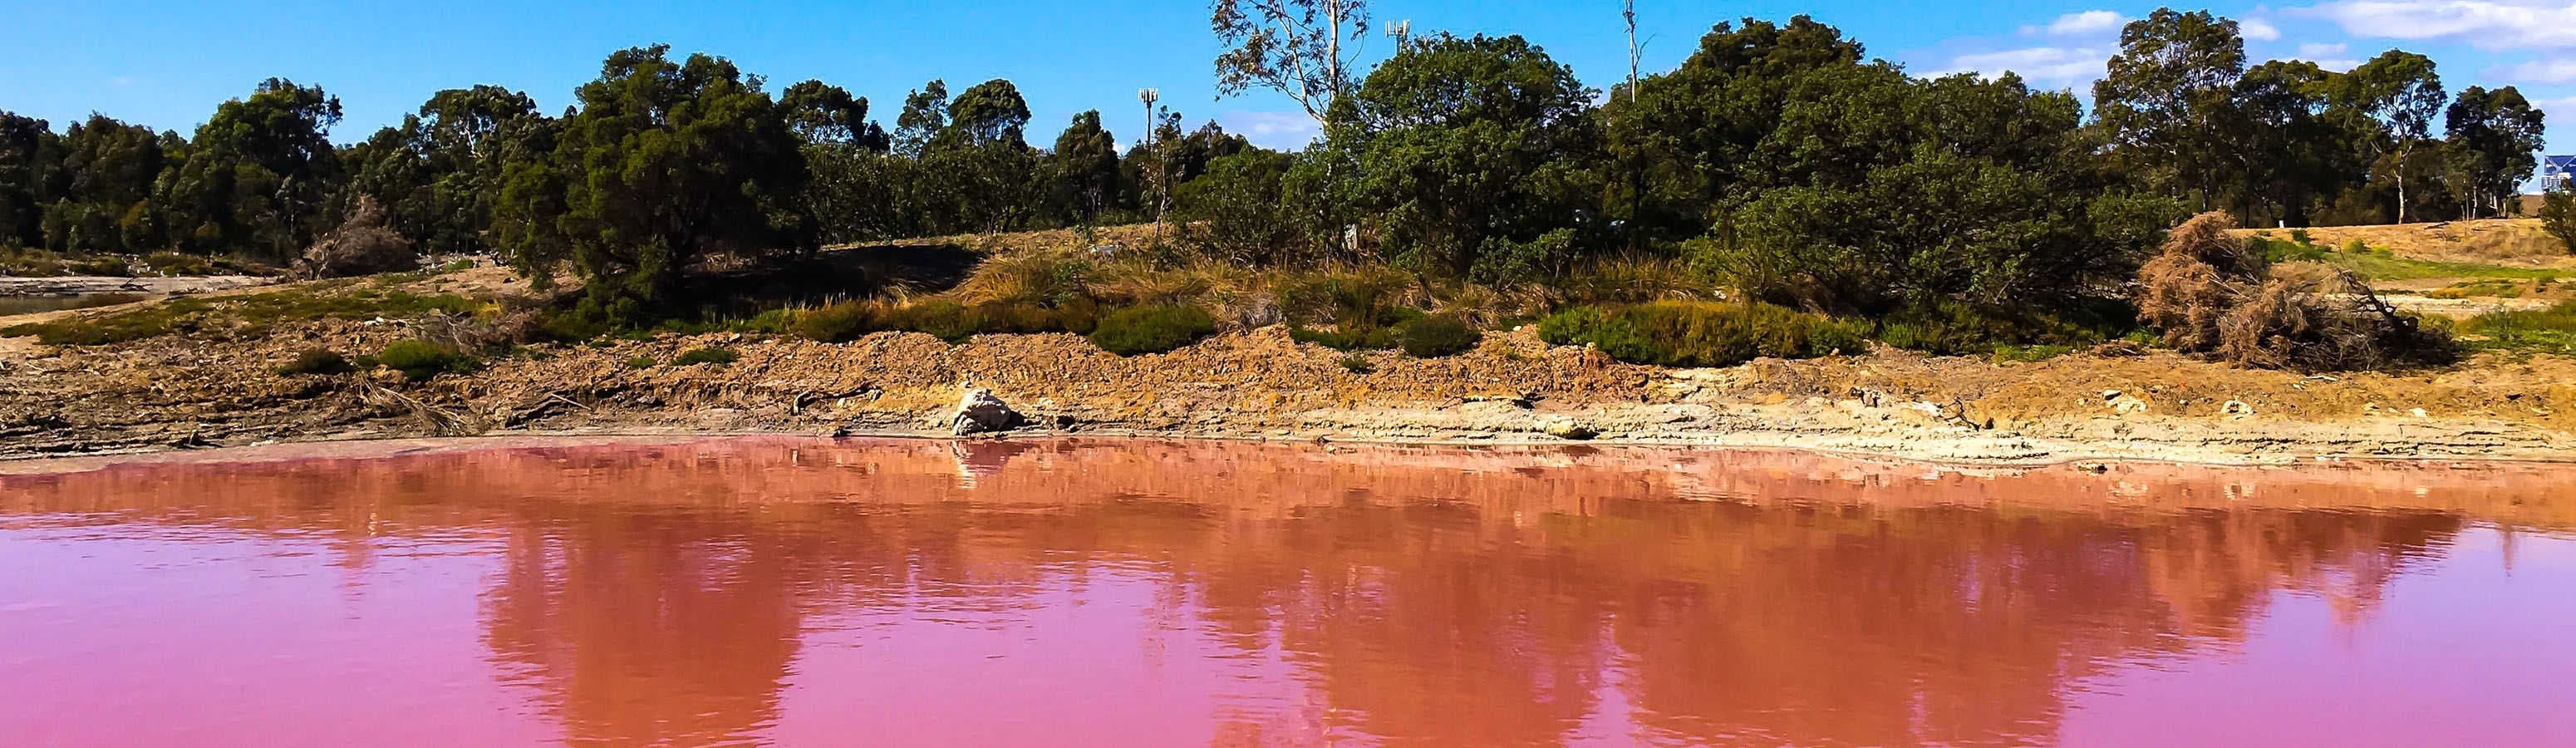 Pink Lake Hilier in Australia Must See!